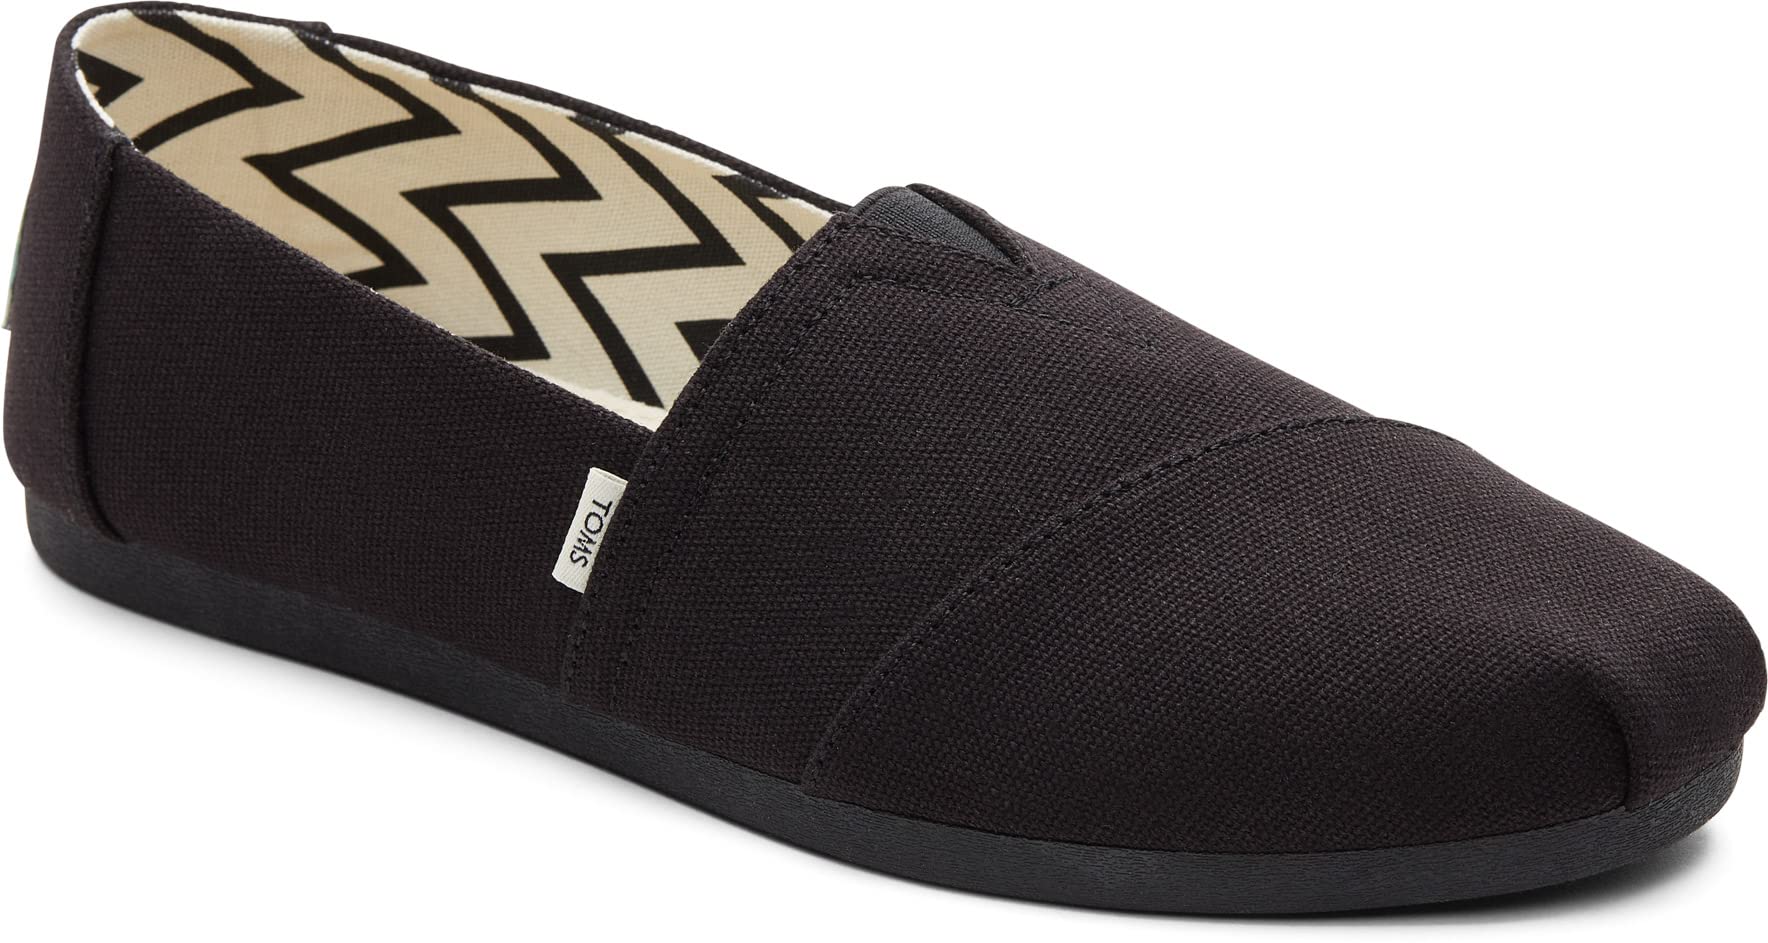 TOMS Women's Alpargata Recycled Cotton Canvas Loafer Flat, Black, 5